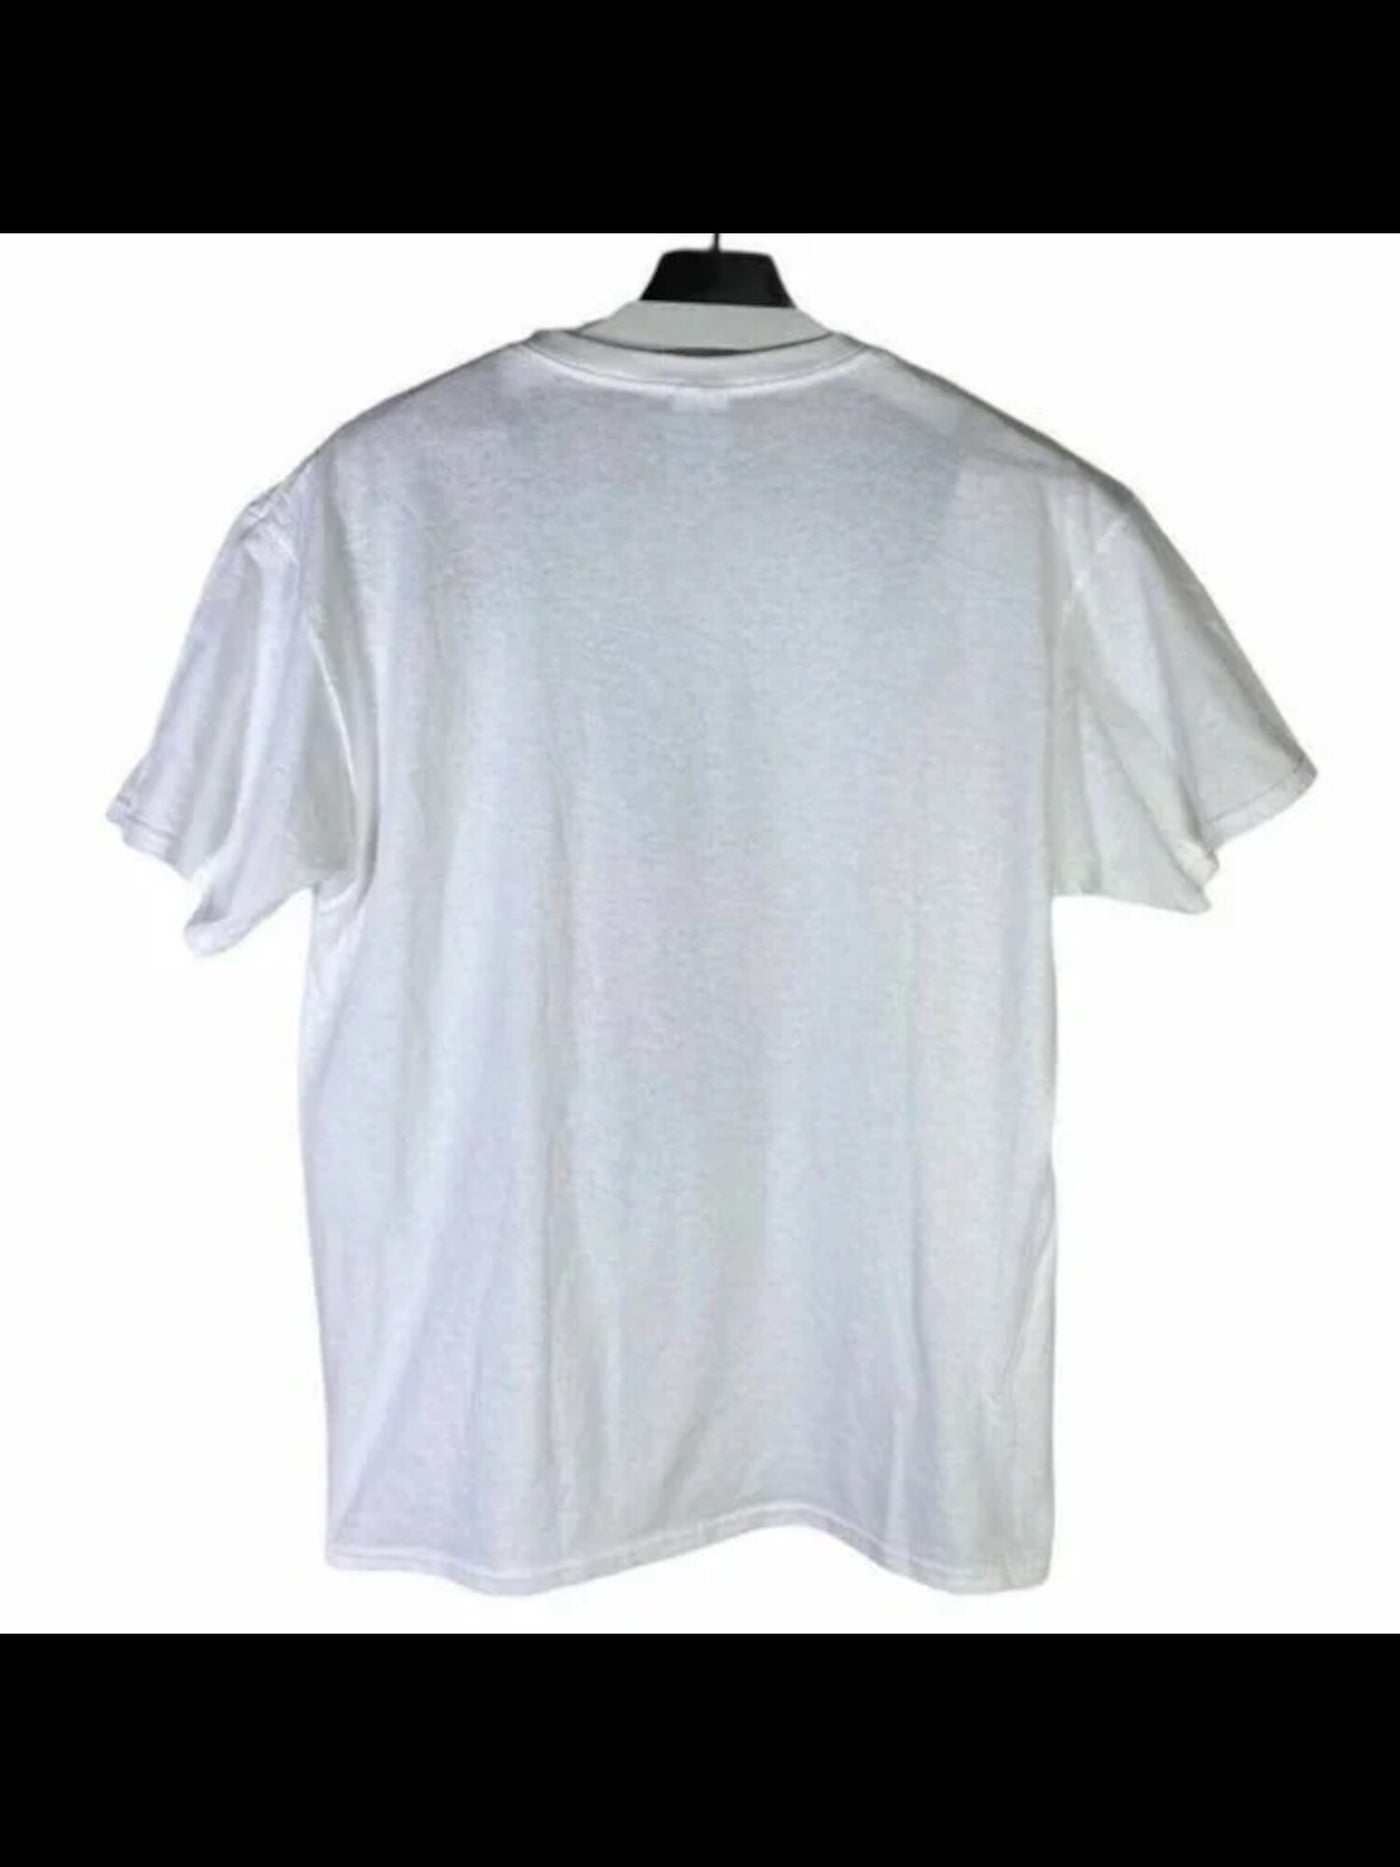 DELTA PRO WEIGHT Mens White Short Sleeve Classic Fit T-Shirt M